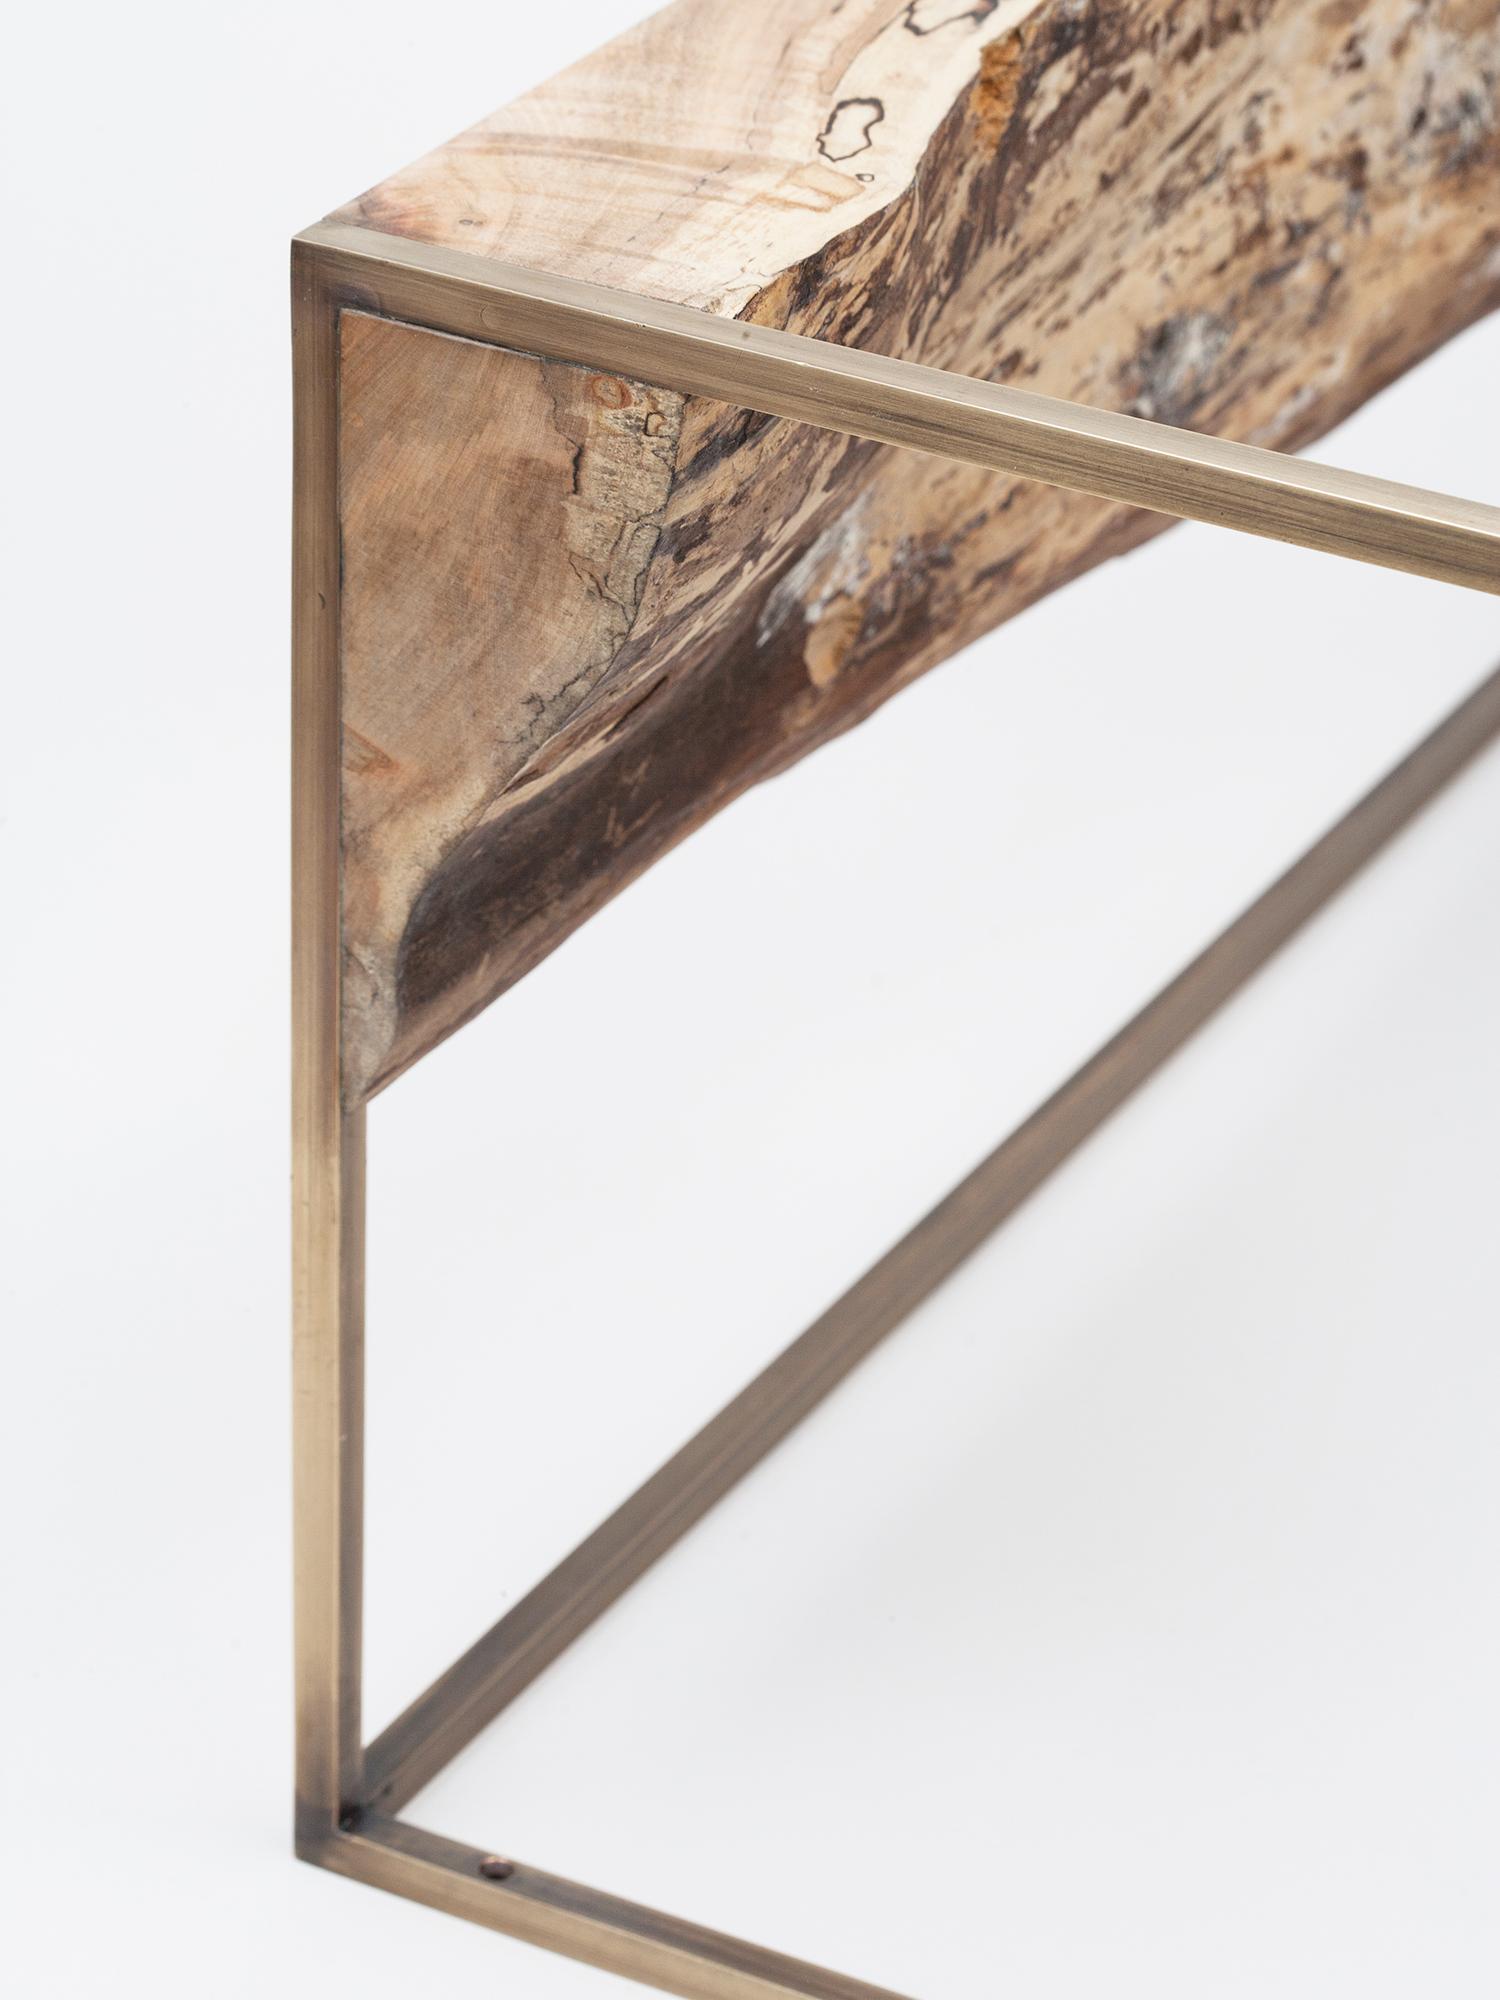 American Floating Console Table by Huy Bui